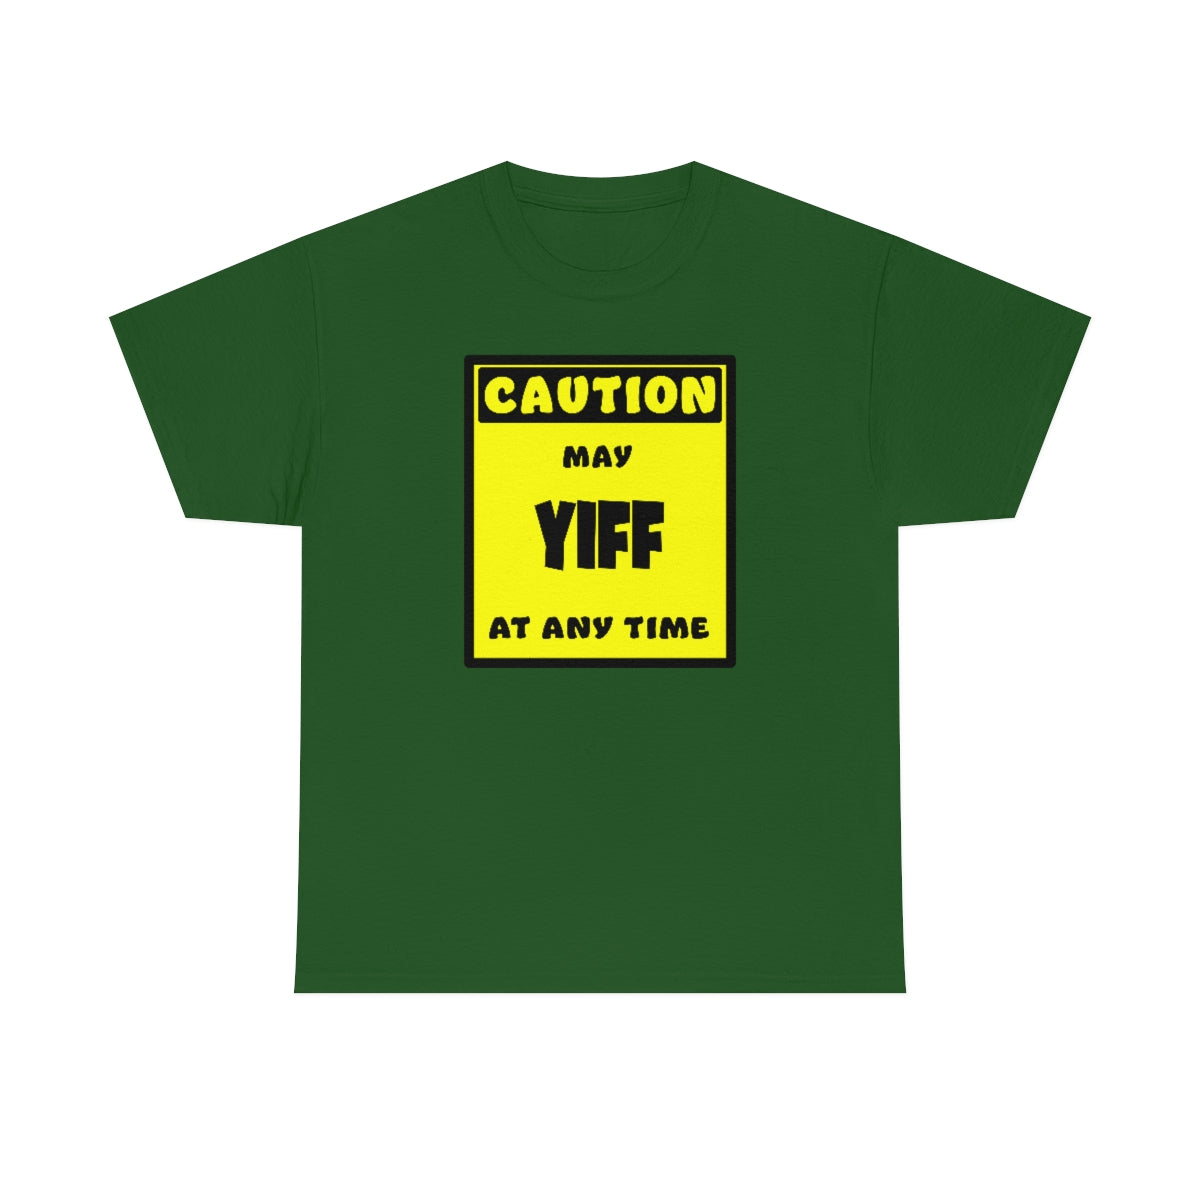 CAUTION! May YIFF at any time! - T-Shirt T-Shirt AFLT-Whootorca Green S 